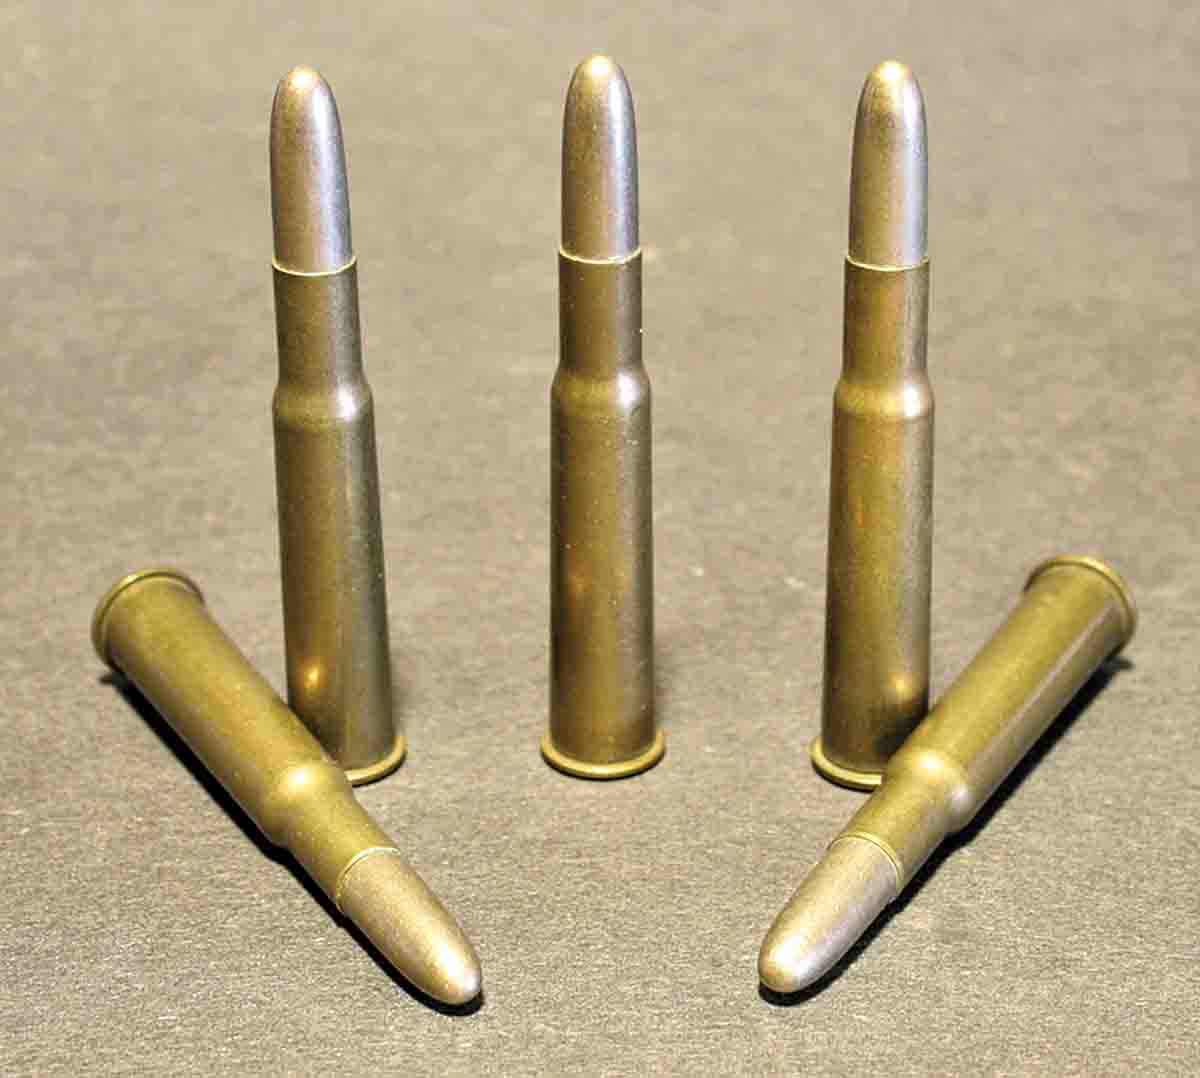 One problem that contributed to bore erosion with early jacketed bullets was cupronickel, a combination of copper and nickel that was very hard, but also left very hard, lumpy bore fouling. These U.S. Army .30-40 Krag rounds were made over a century ago, and their “silver” color shows the large amount of nickel.